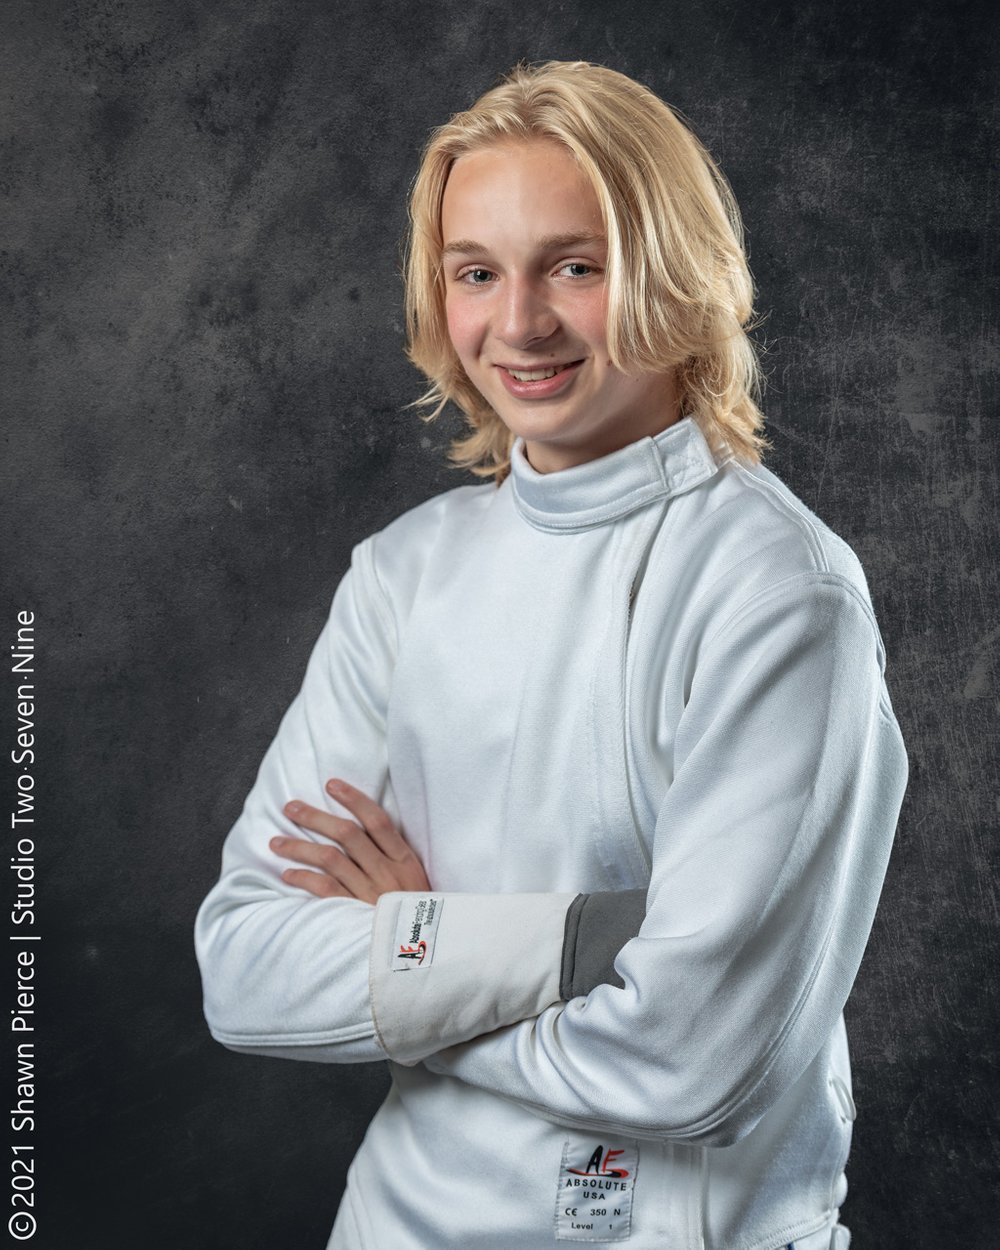  My first shoot was with Avery, a high school junior who has been fencing for years. If I’m honest I was flying by the seat of my pants with this one. I had no idea what I was doing but through a little trial and error we got some ok images. 